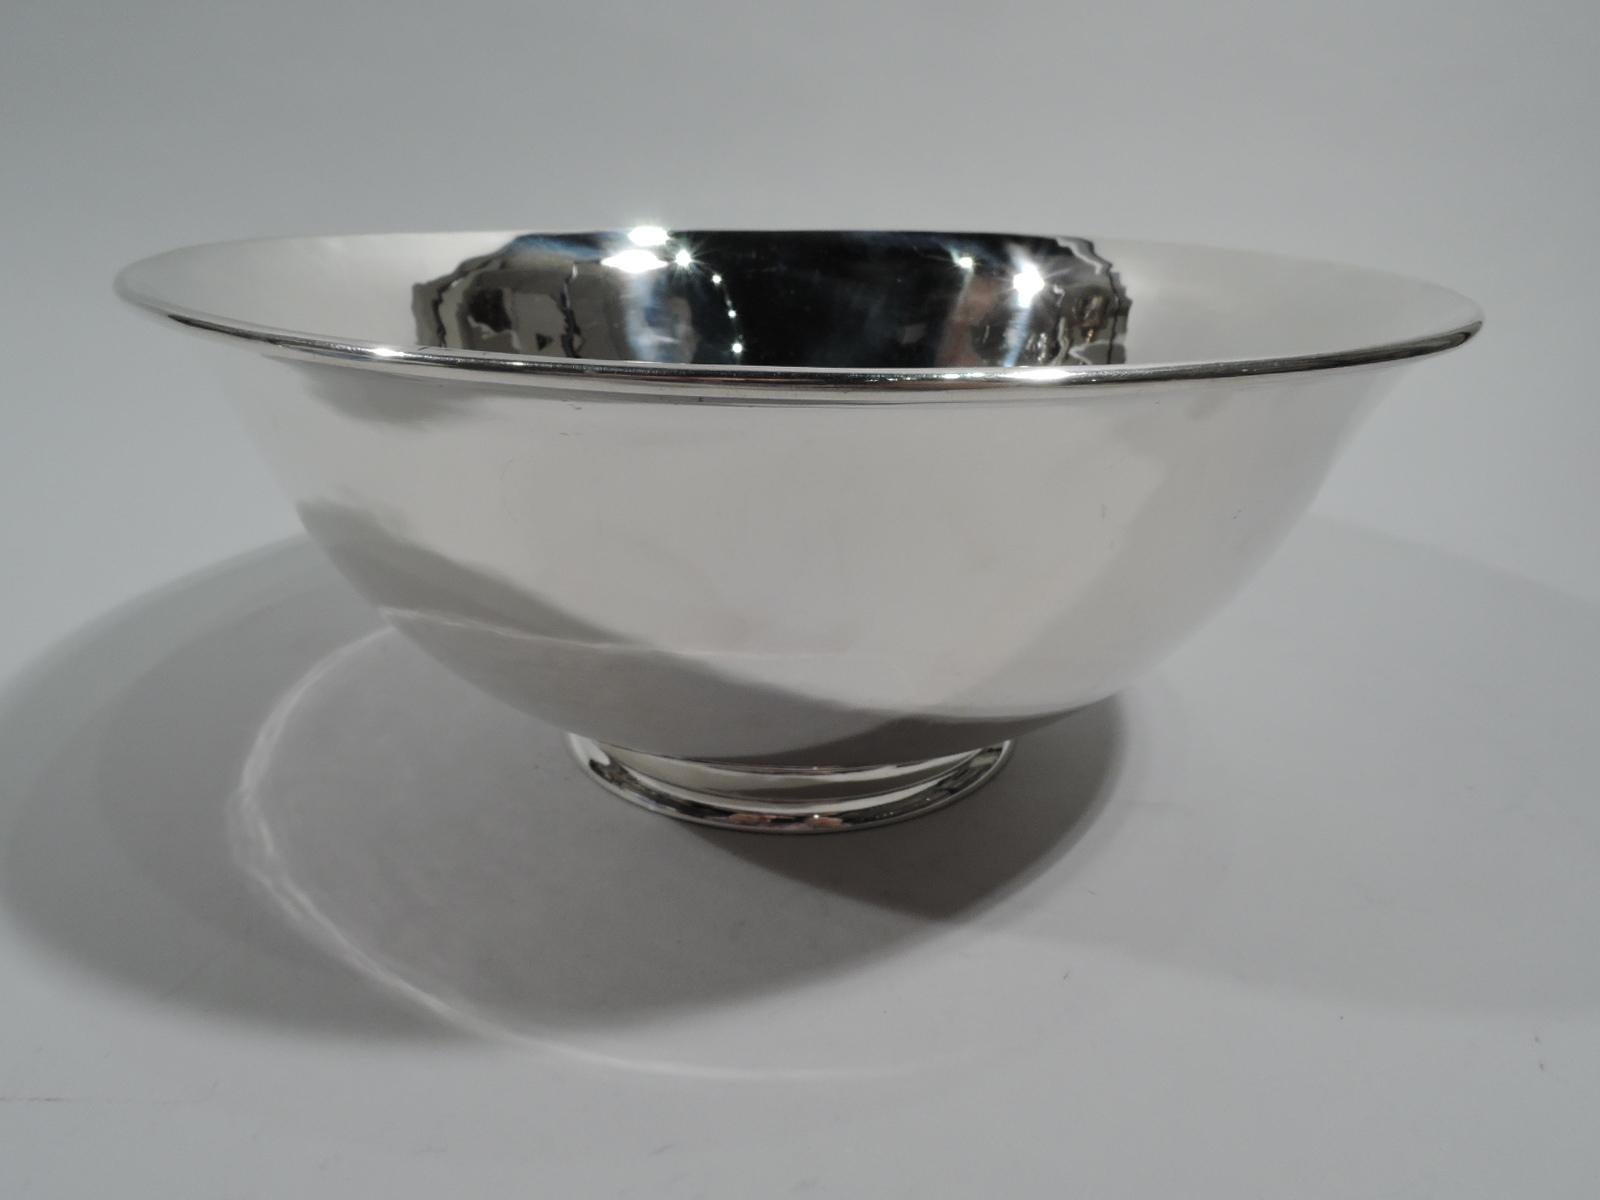 Hand-made sterling silver bowl. Made by Arthur Stone in Gardner, Mass., ca 1920. Traditional Revere form with curved sides and stepped inset foot. Fully marked including maker’s stamp and craftsman’s initial T for Herbert A. Taylor. Weight: 24.5